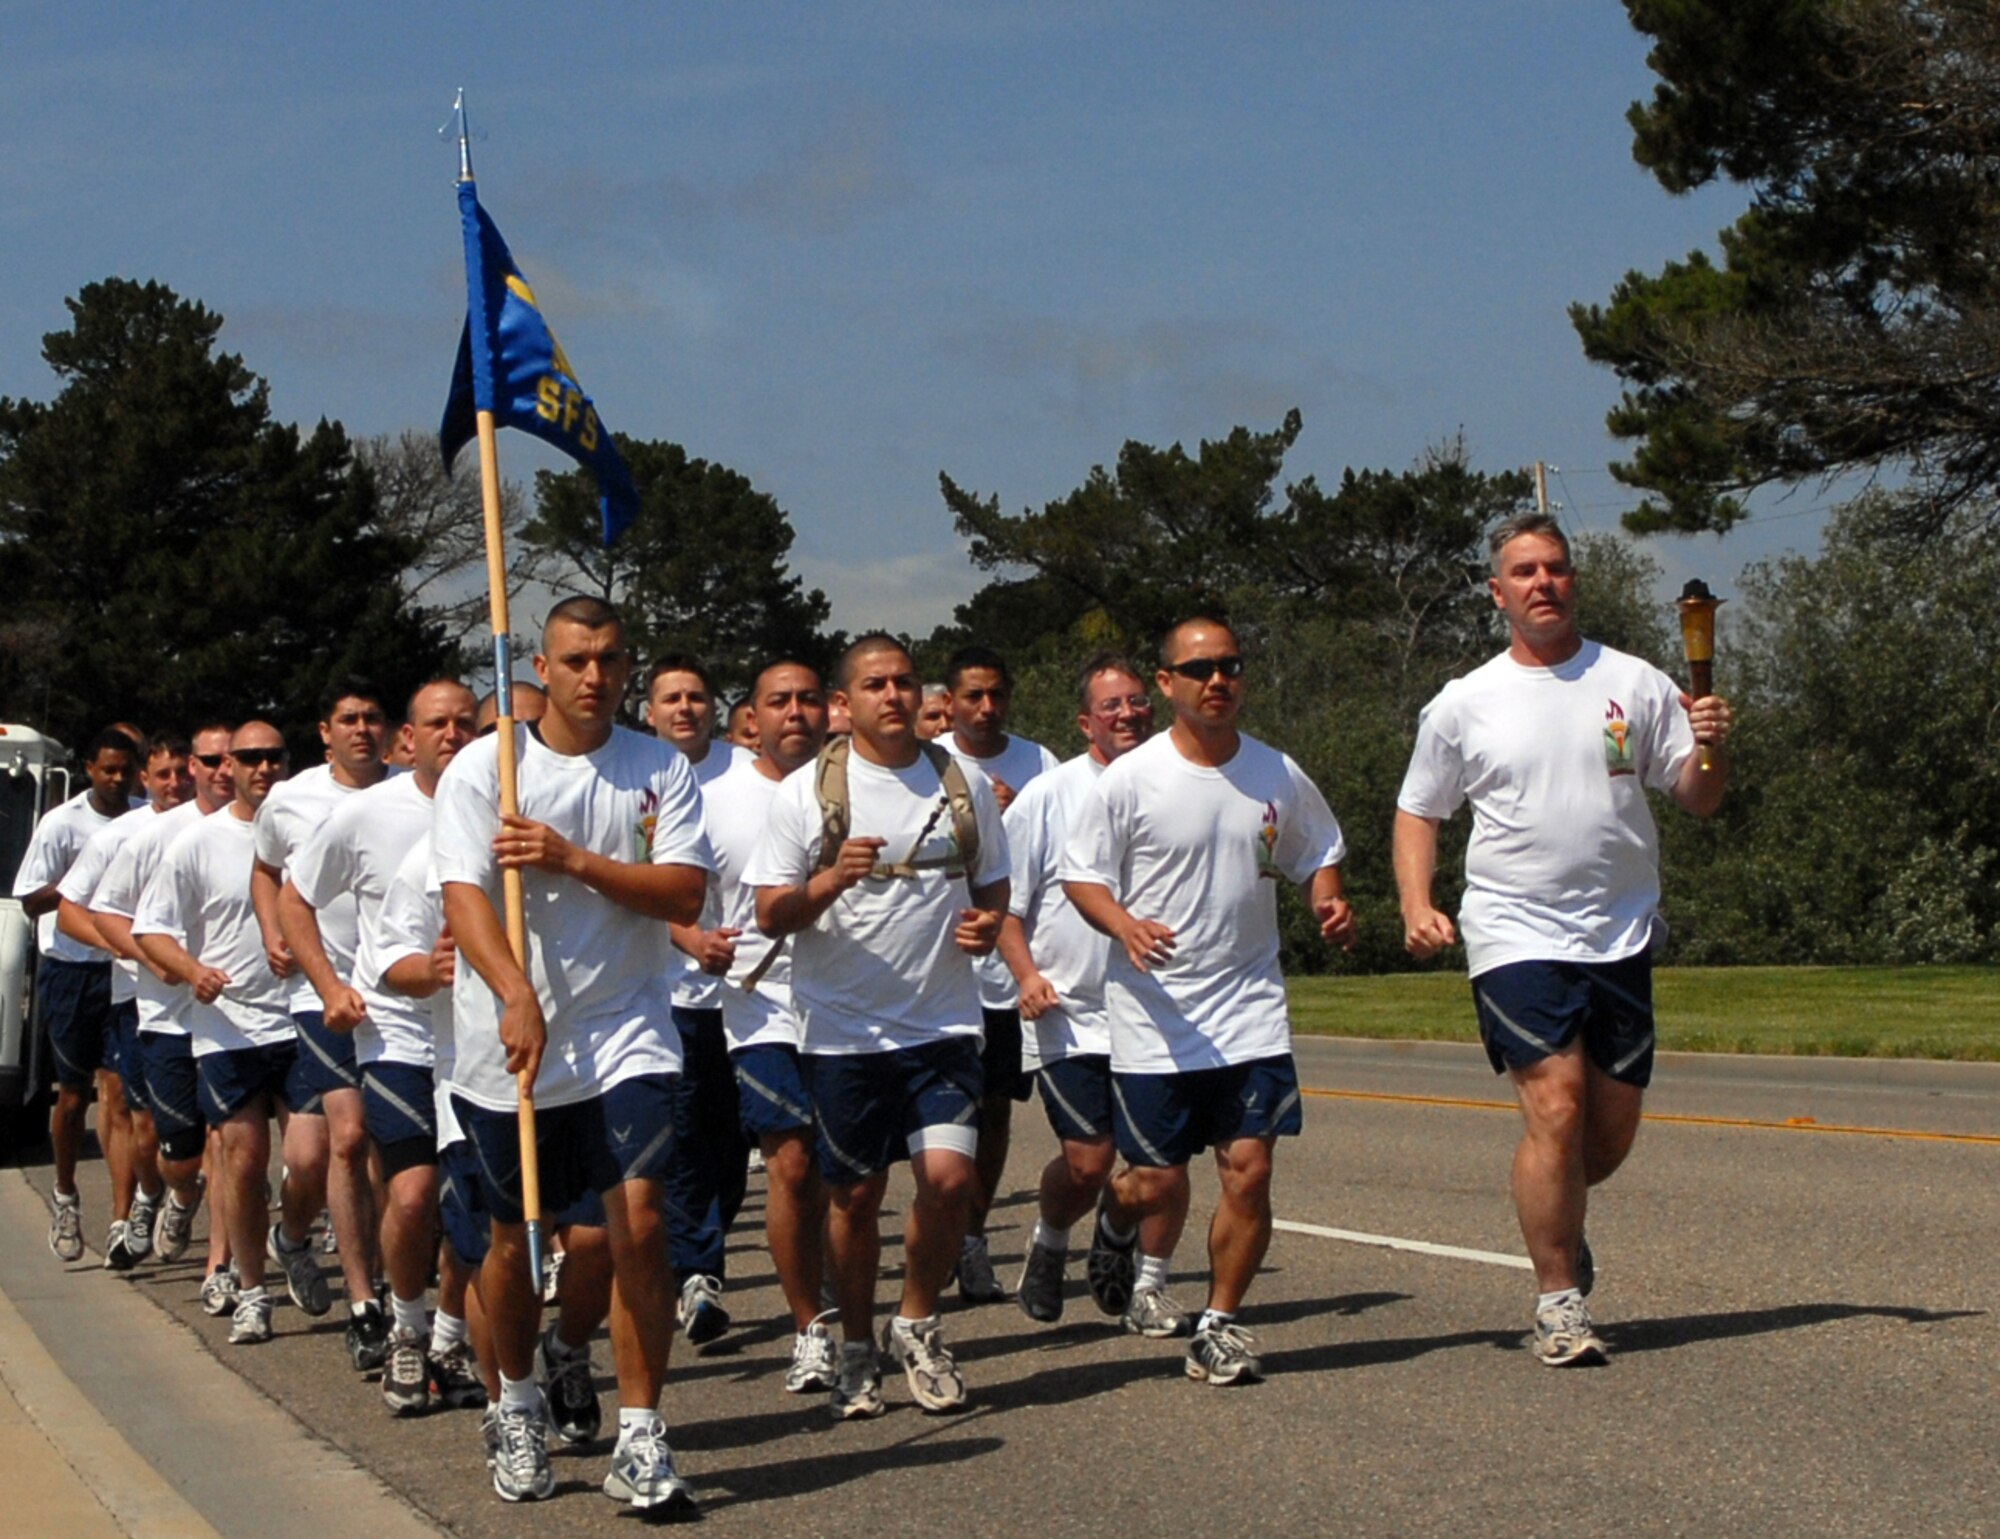 VANDENBERG AIR FORCE BASE, Calif. – Alongside Airmen from his squadron, Lt. Col. Joseph Milner, the 30th Security Forces Squadron commander, runs the Special Olympics torch through the base’s cantonment area here June 9. Vandenberg is just one leg of the county-spanning torch relay fundraiser performed by Santa Barbara County law enforcement agencies. (U.S. Air Force photo/1st Lt. Raymond Geoffroy)